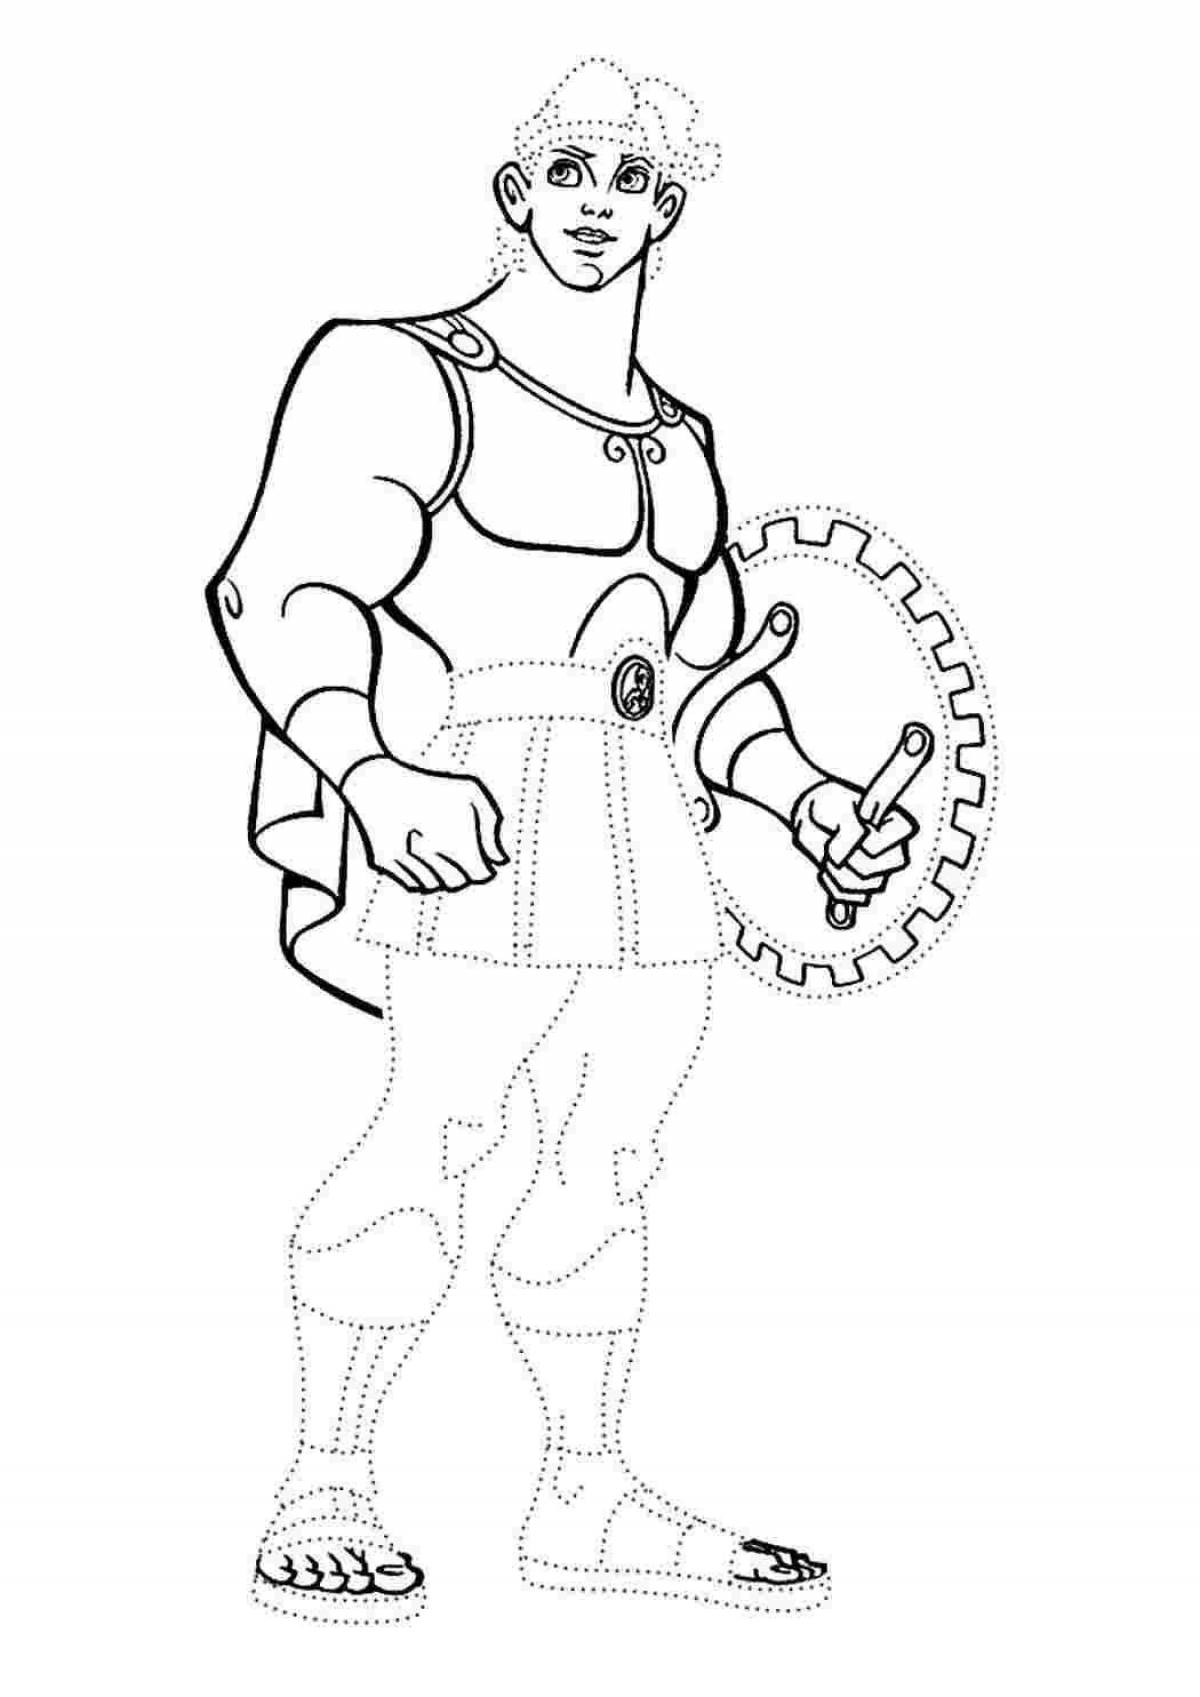 Coloring page dazzling hercules